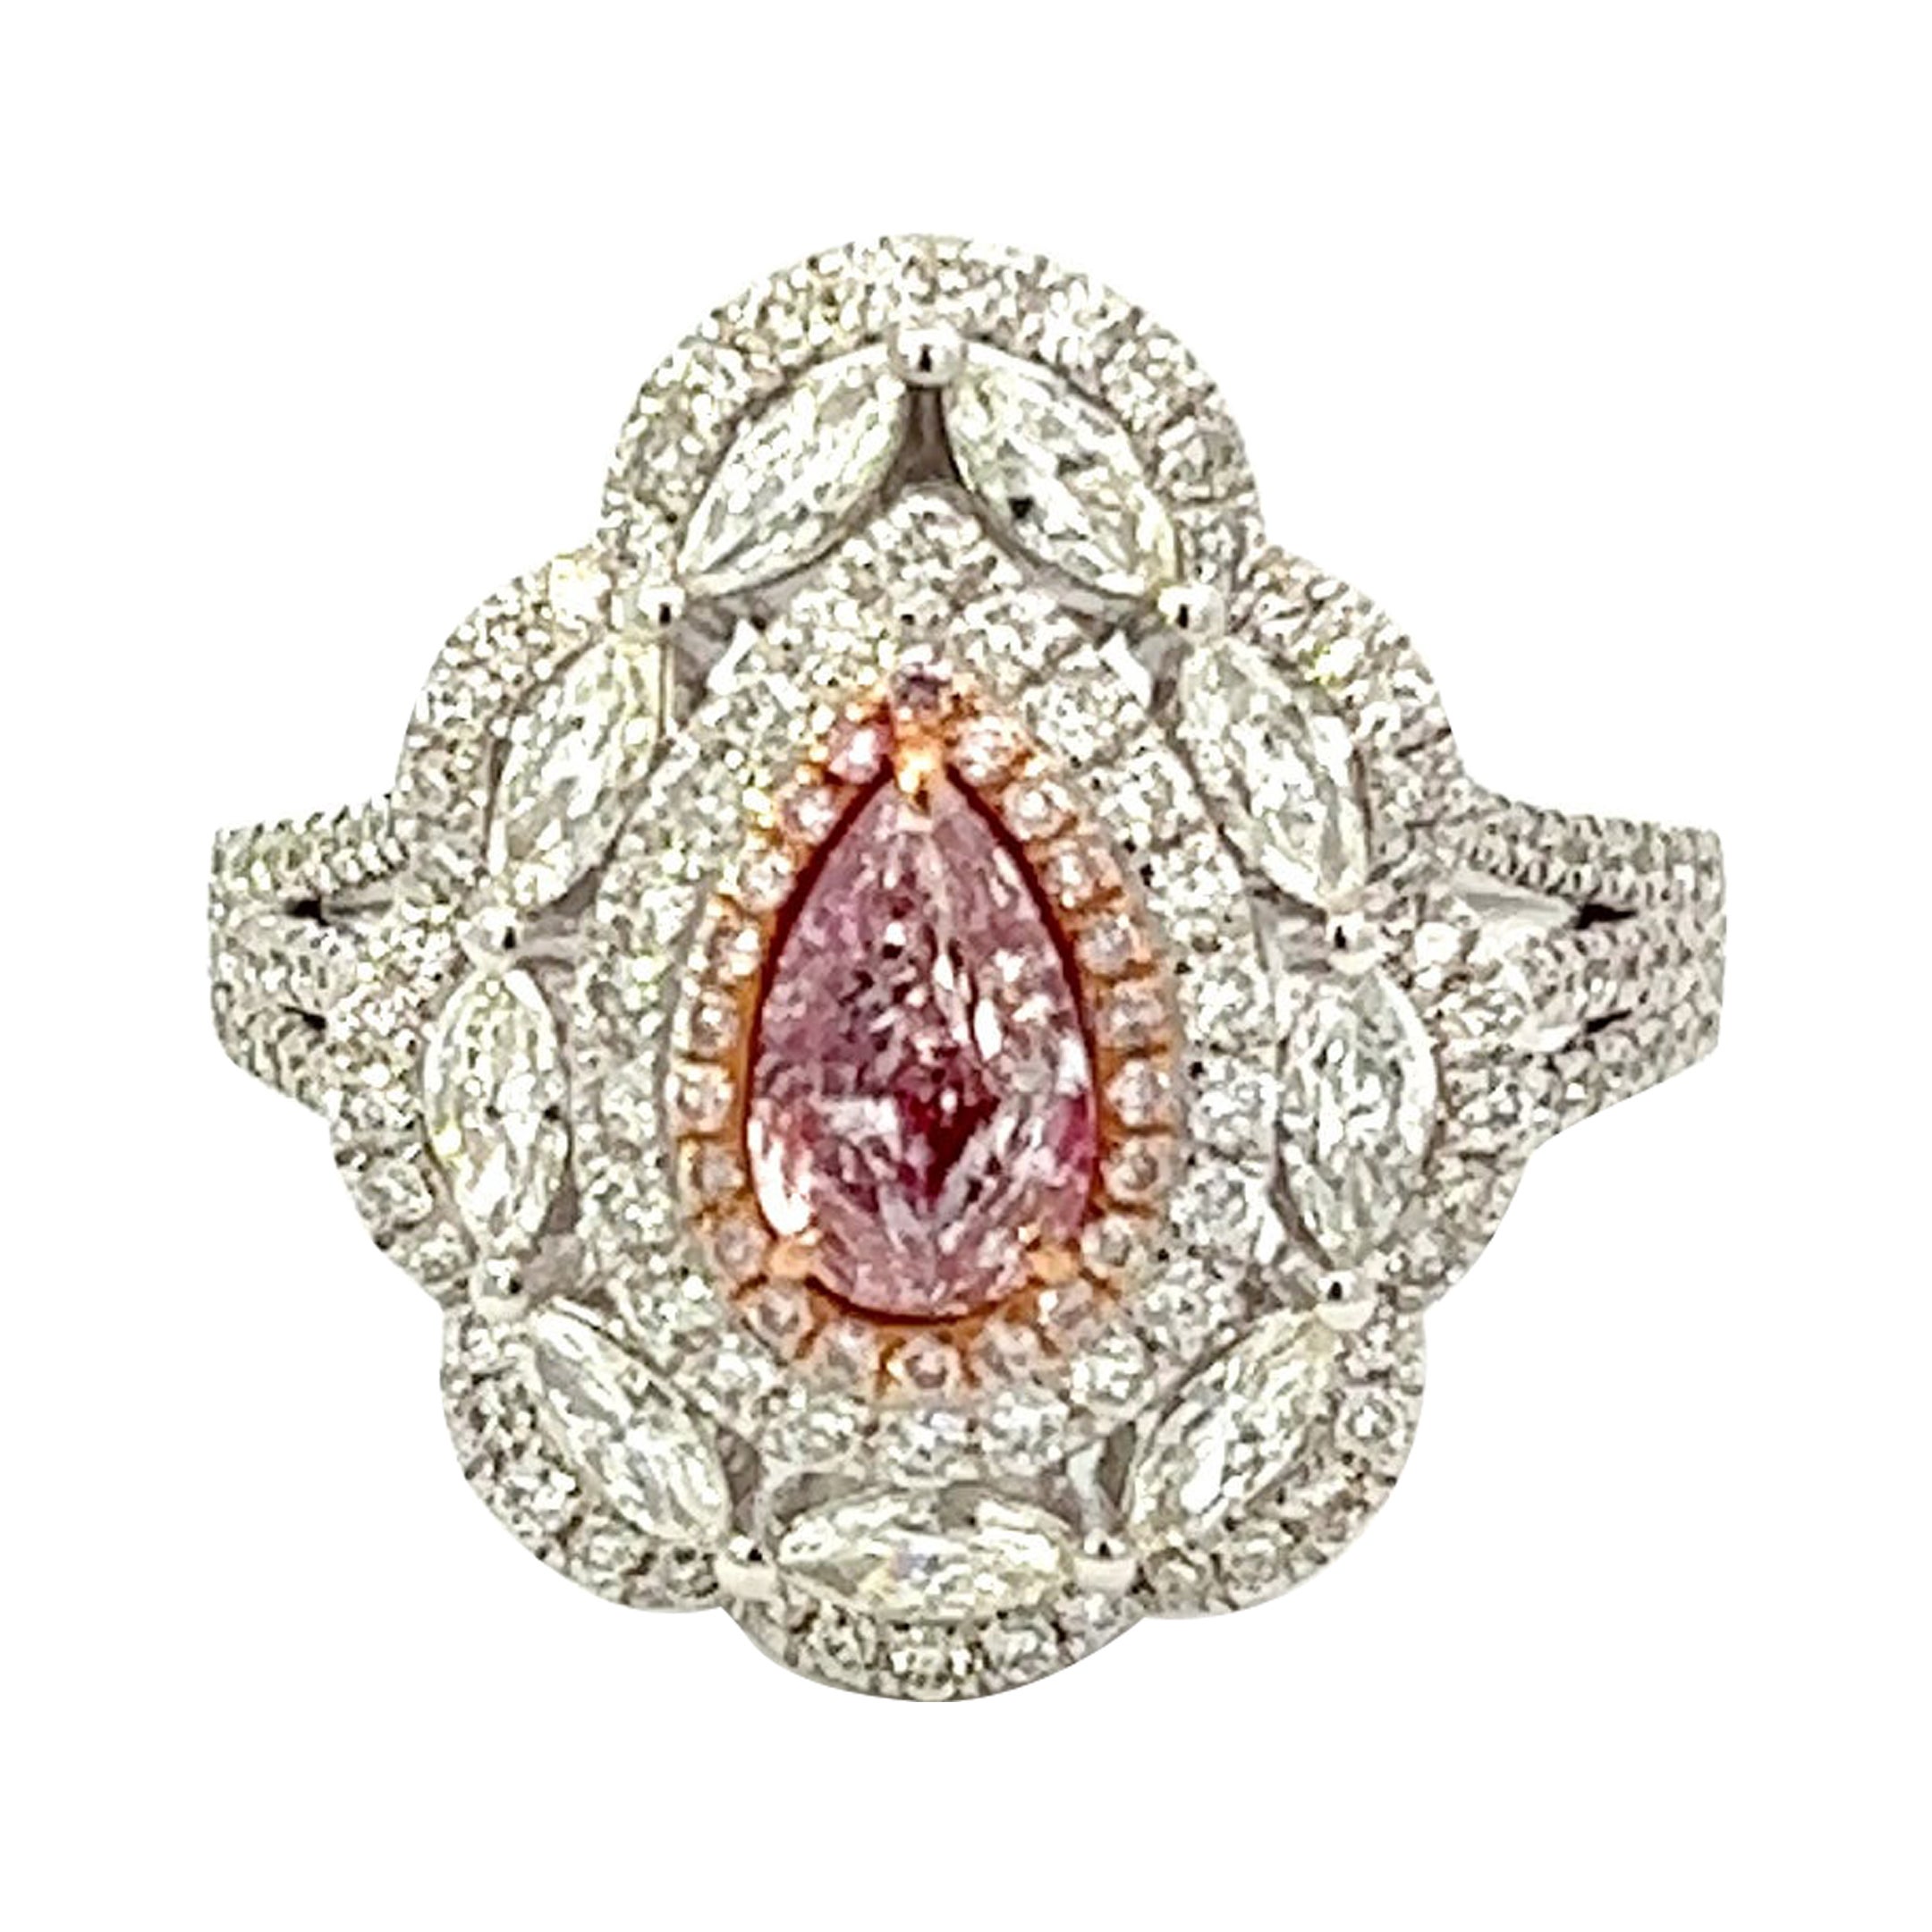 GIA Certified 0.54 Carat Fancy Light Pink Diamond Ring For Sale